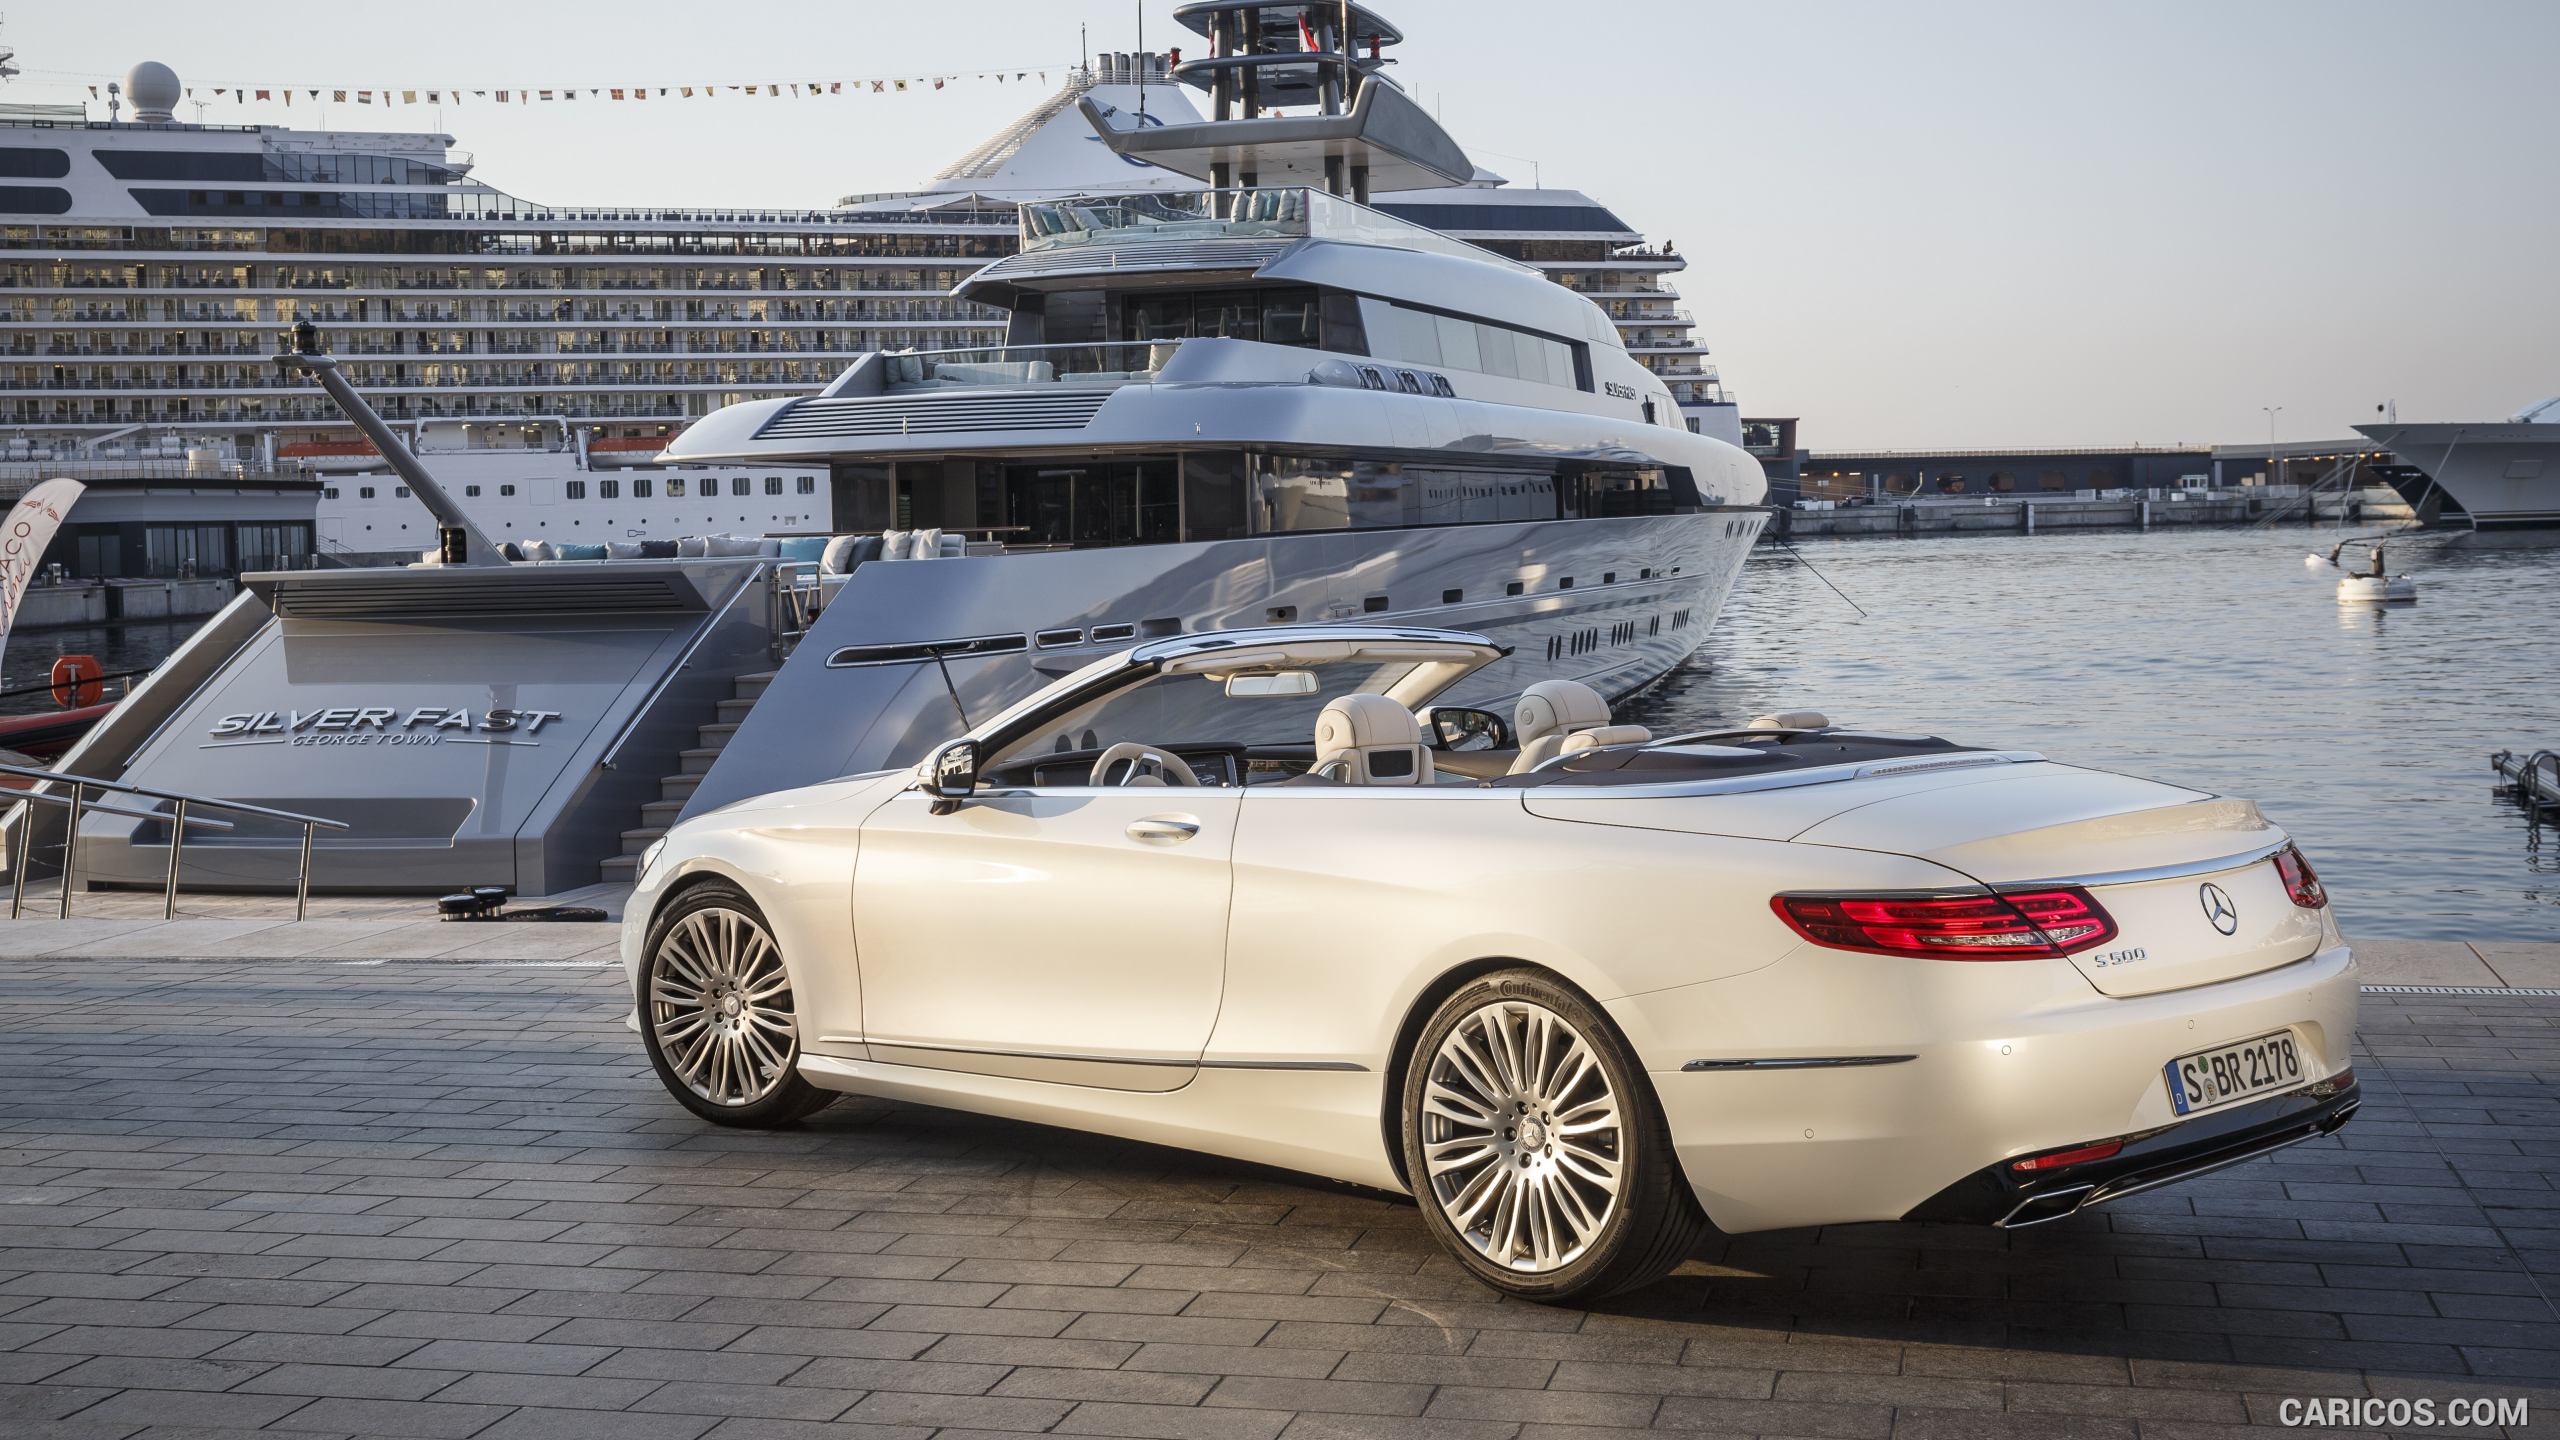 2017 Mercedes-Benz S-Class S500 Cabriolet and Silver Fast Yacht - Rear, #56 of 56